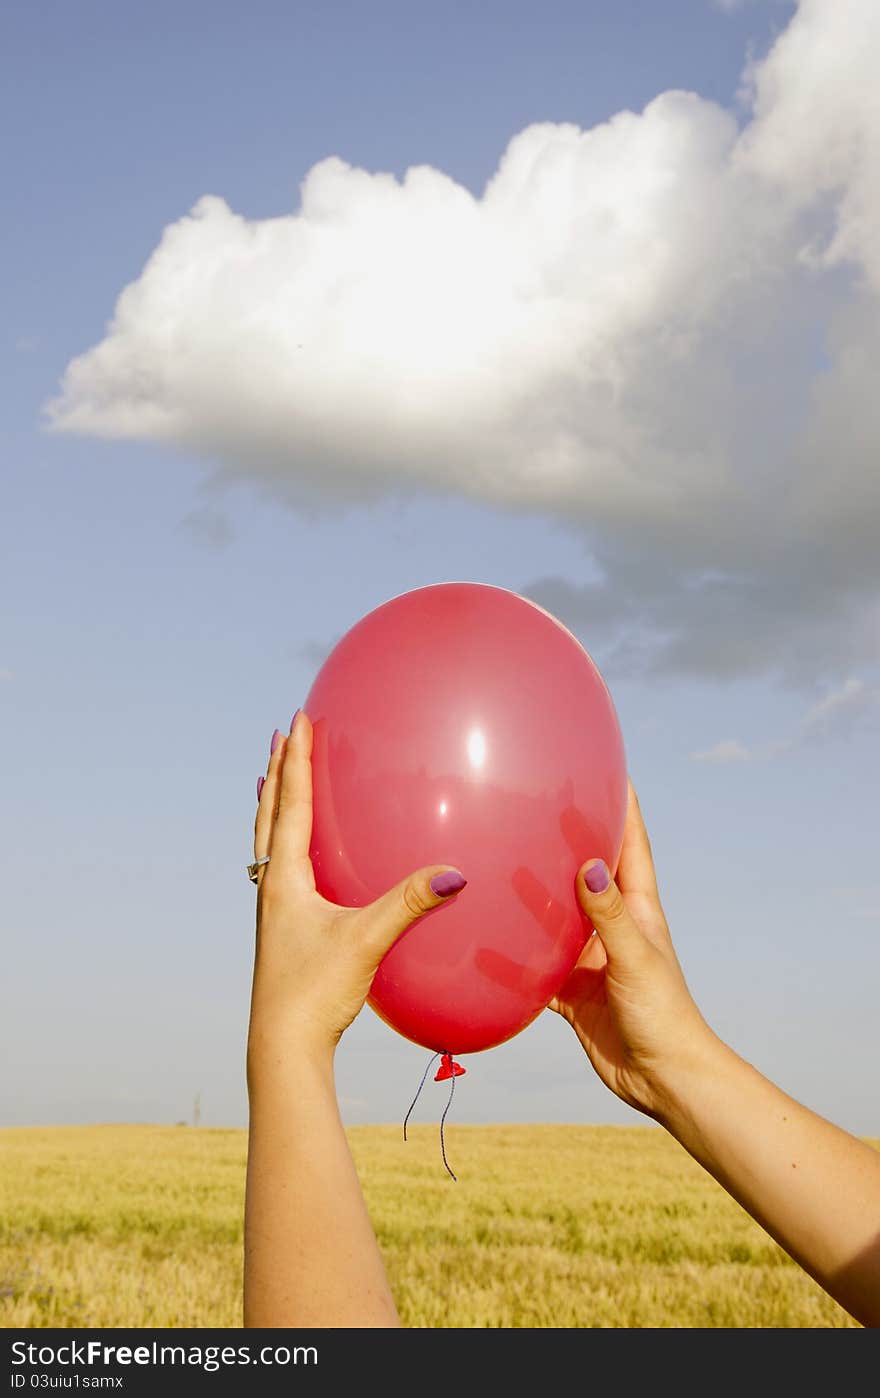 Woman hands holding red balloon. Agricultural field and sky with clouds in background. Woman hands holding red balloon. Agricultural field and sky with clouds in background.